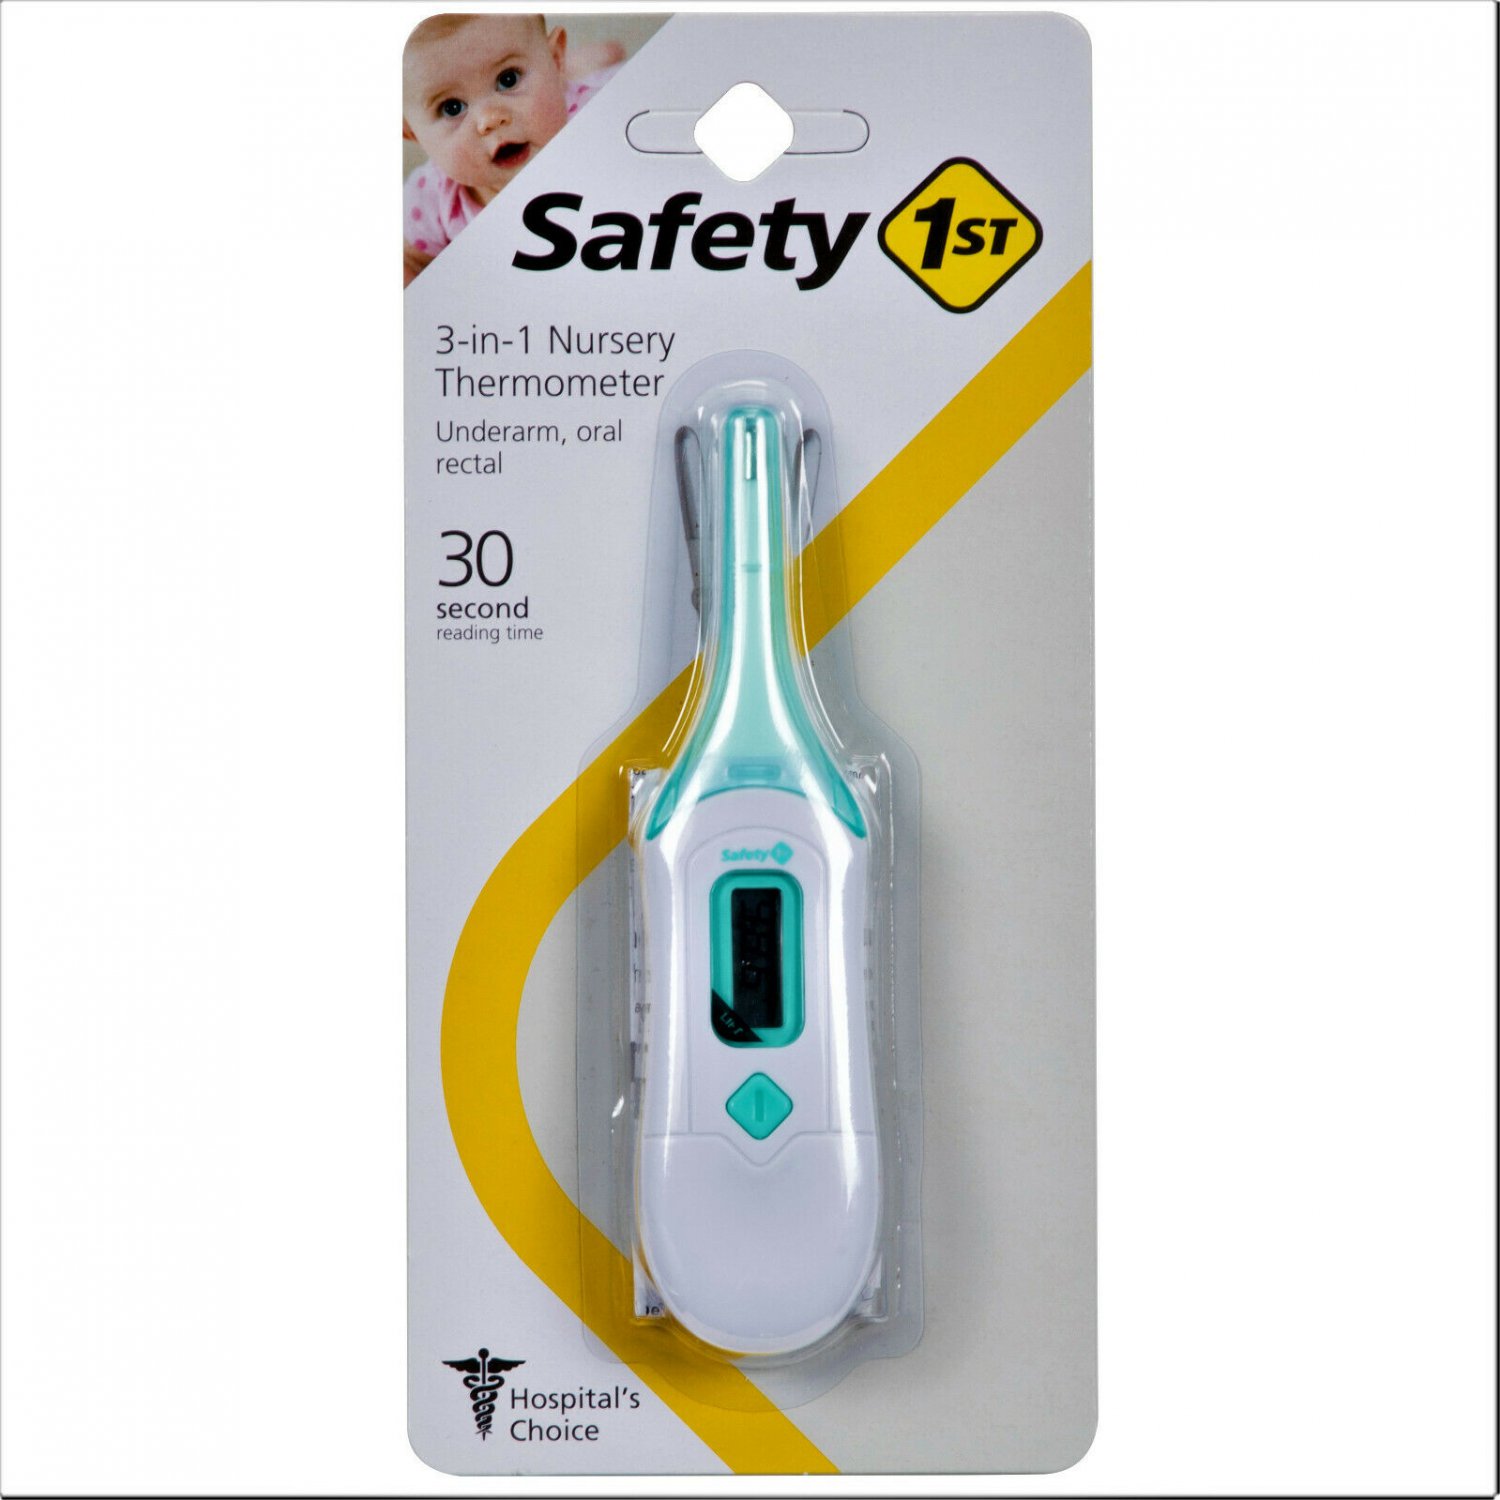 Safety 1st Nursery Thermometer 3 in 1 (Pack of 2)